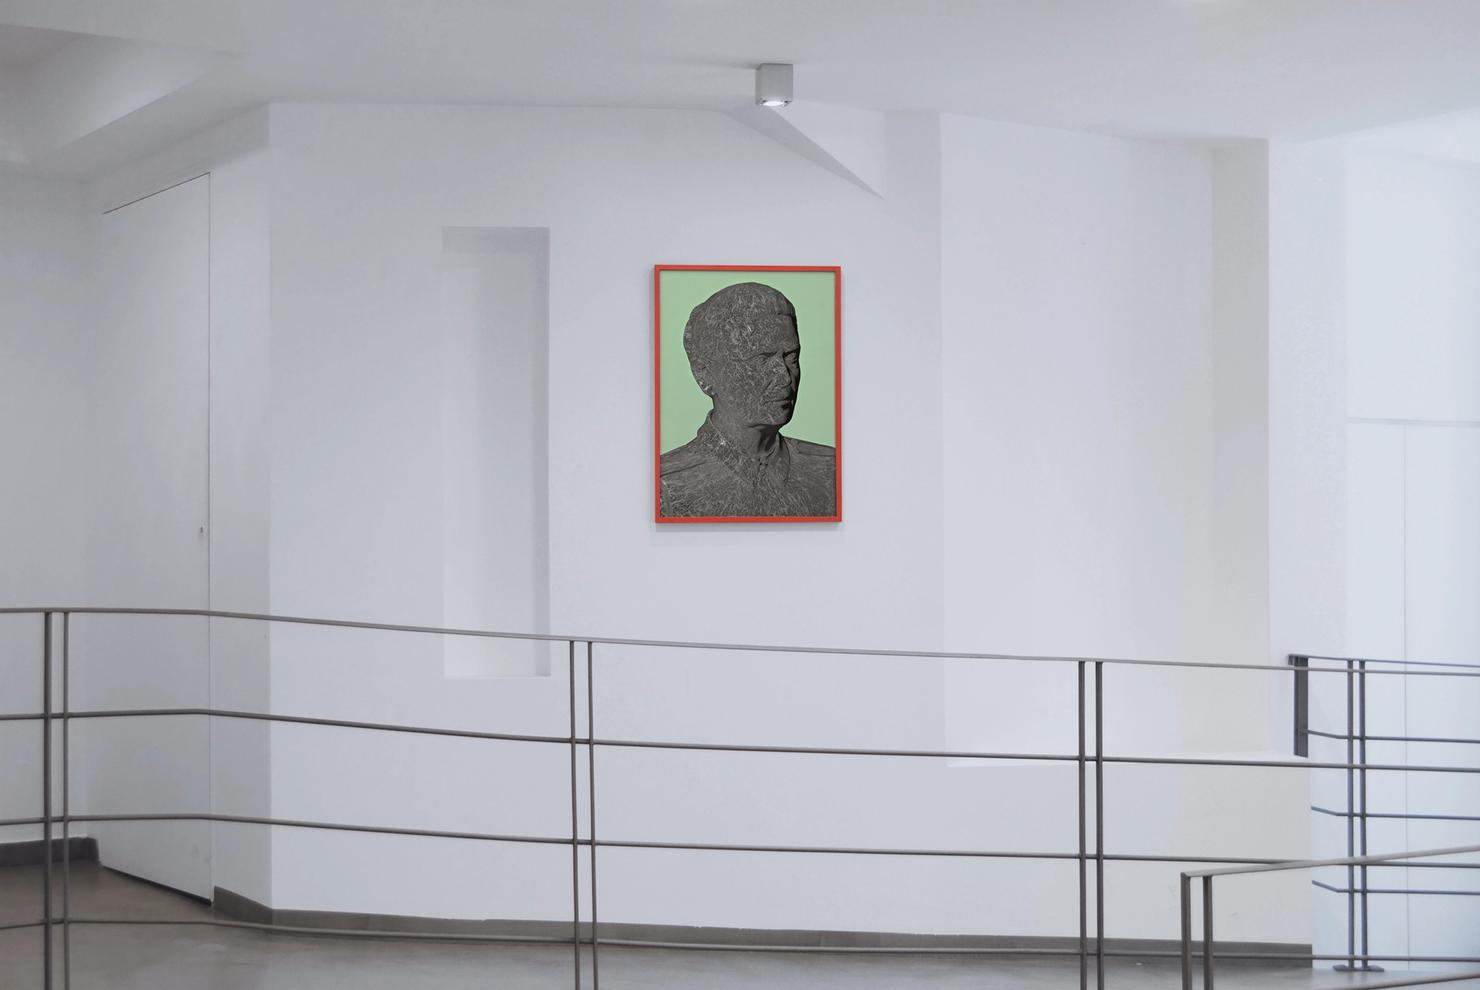 A dark grey cement ramp for the disabled in Art Space Pythagorion. On a white wall a very large, computer-generated portrait of Josip Broz Tito.